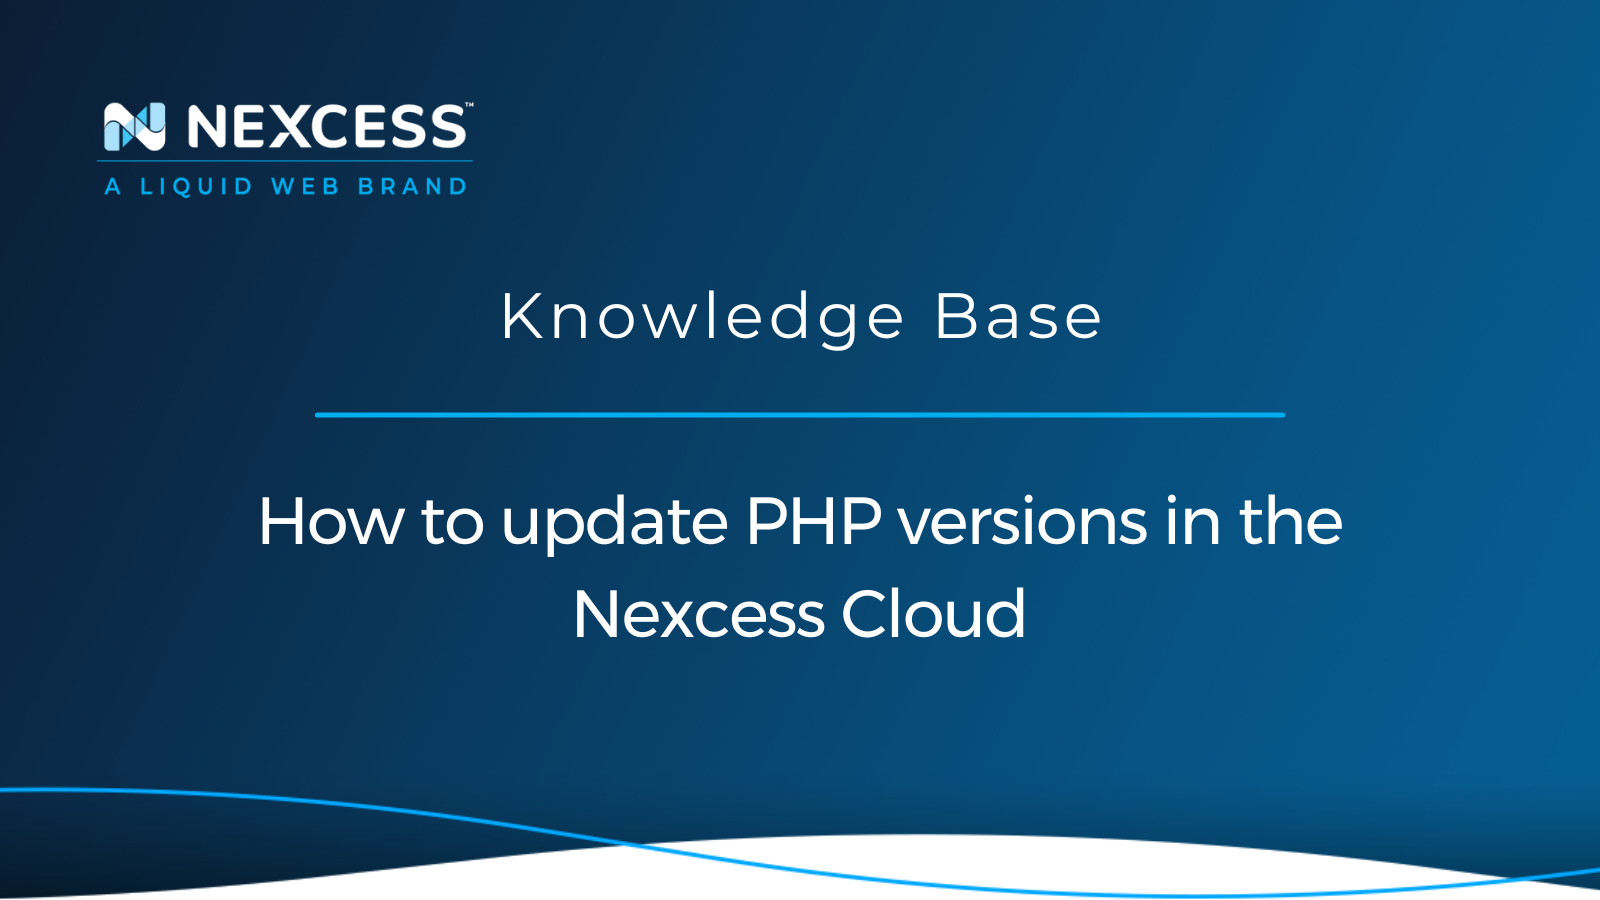 How to update PHP versions in the Nexcess Cloud